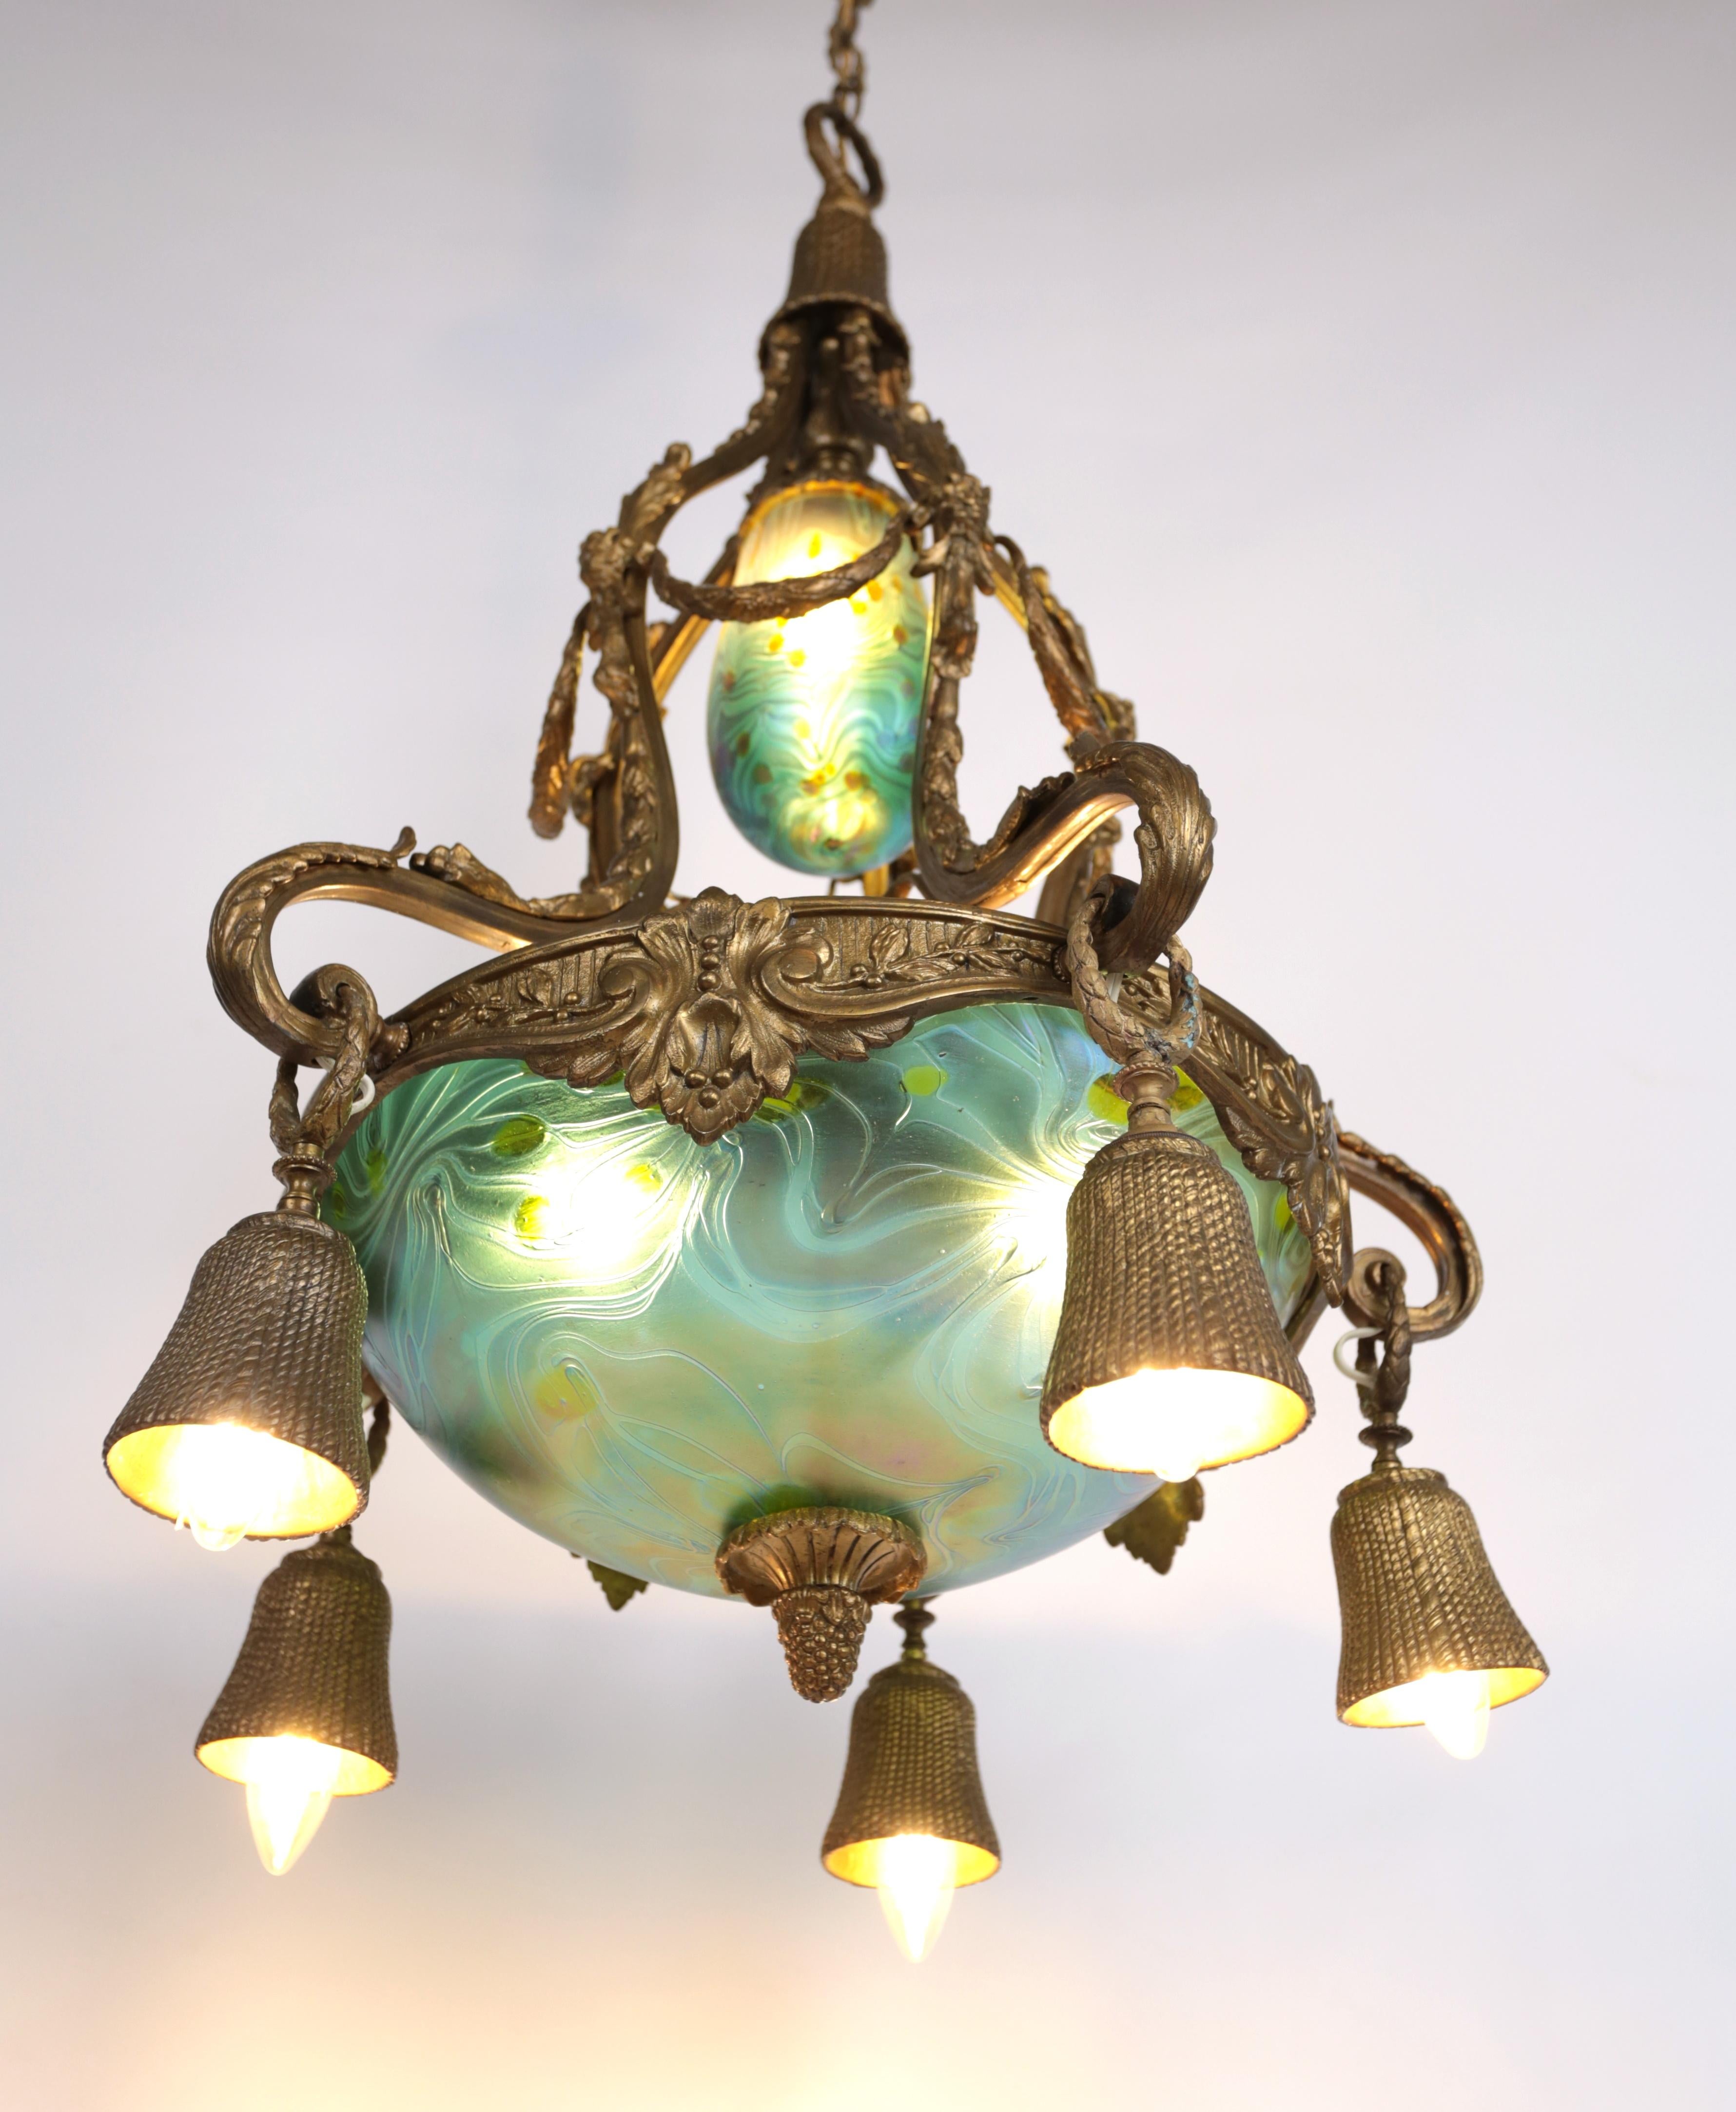 Art Nouveau bronze chandelier with iridescent glass shades
A luxurious model of a chandelier from the Art Nouveau period. The body of the chandelier is made of patinated bronze with rich plant decoration and perfectly rendered details. The